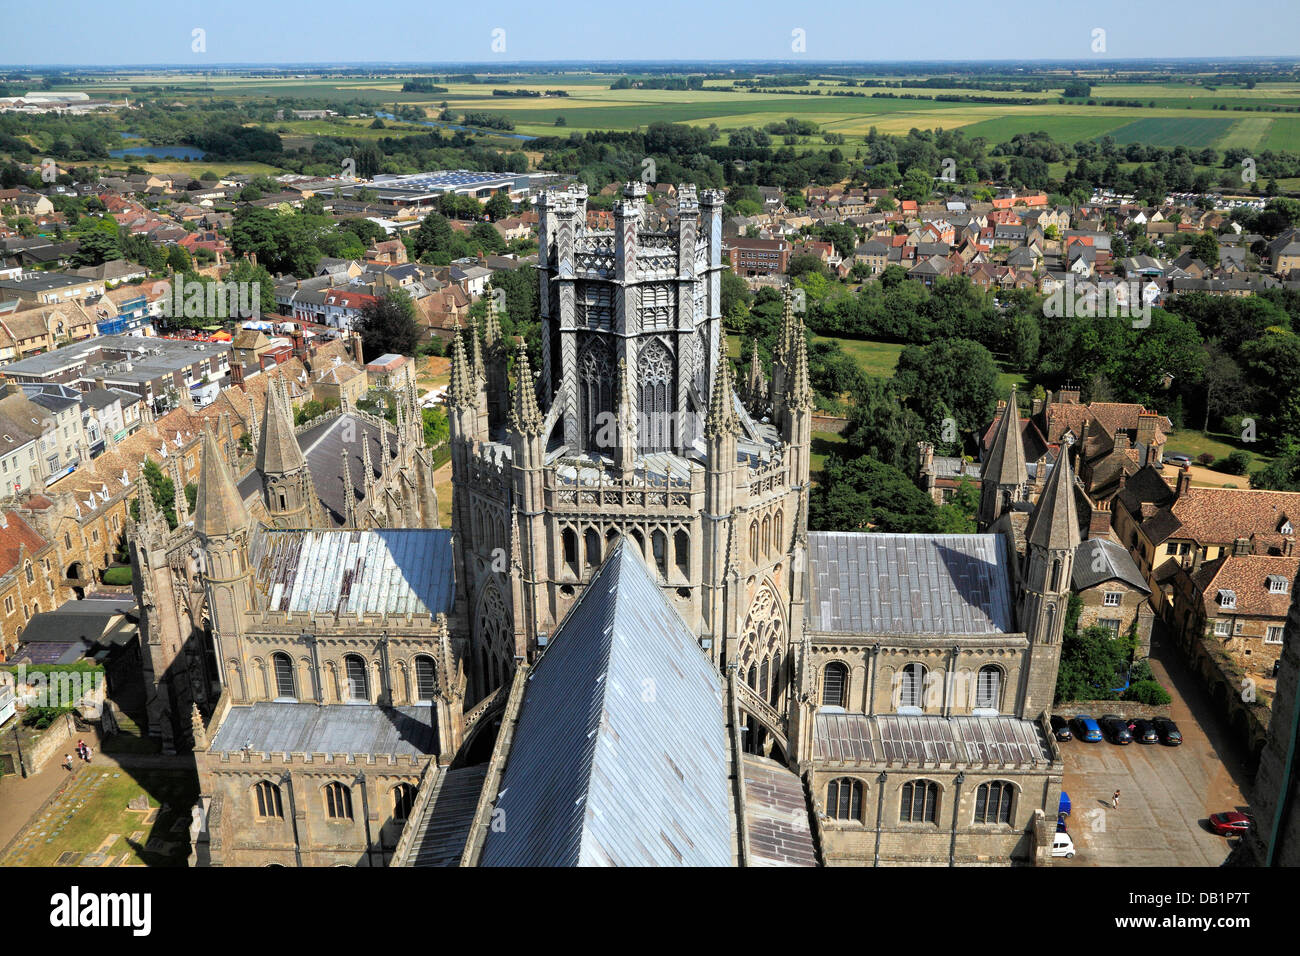 Ely Cathedral, Octagon and Lantern Towers from West Tower, Cambridgeshire England UK English medieval cathedrals tower nave roof Stock Photo